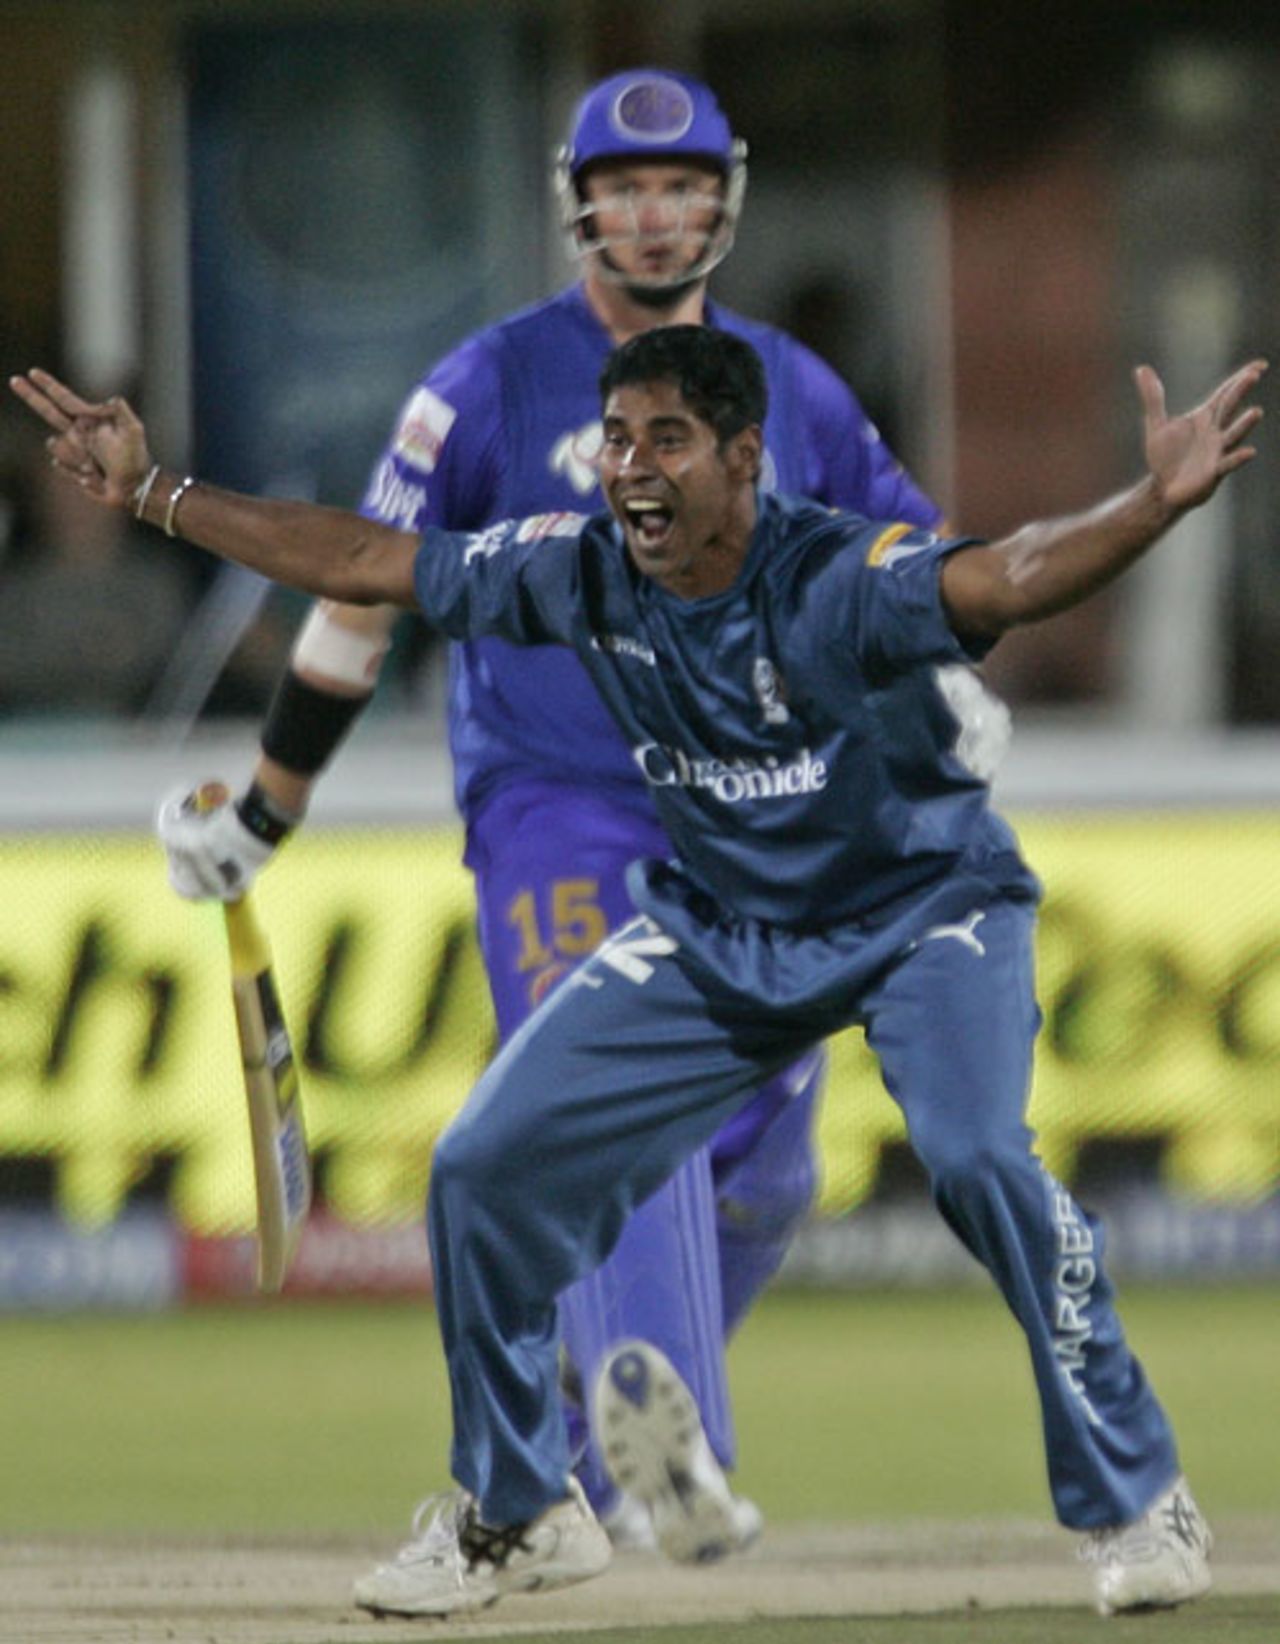 Chaminda Vaas trapped Graeme Smith lbw with his first delivery, Deccan Chargers v Rajasthan Royals, IPL, 40th match, Kimberley, May 11, 2009